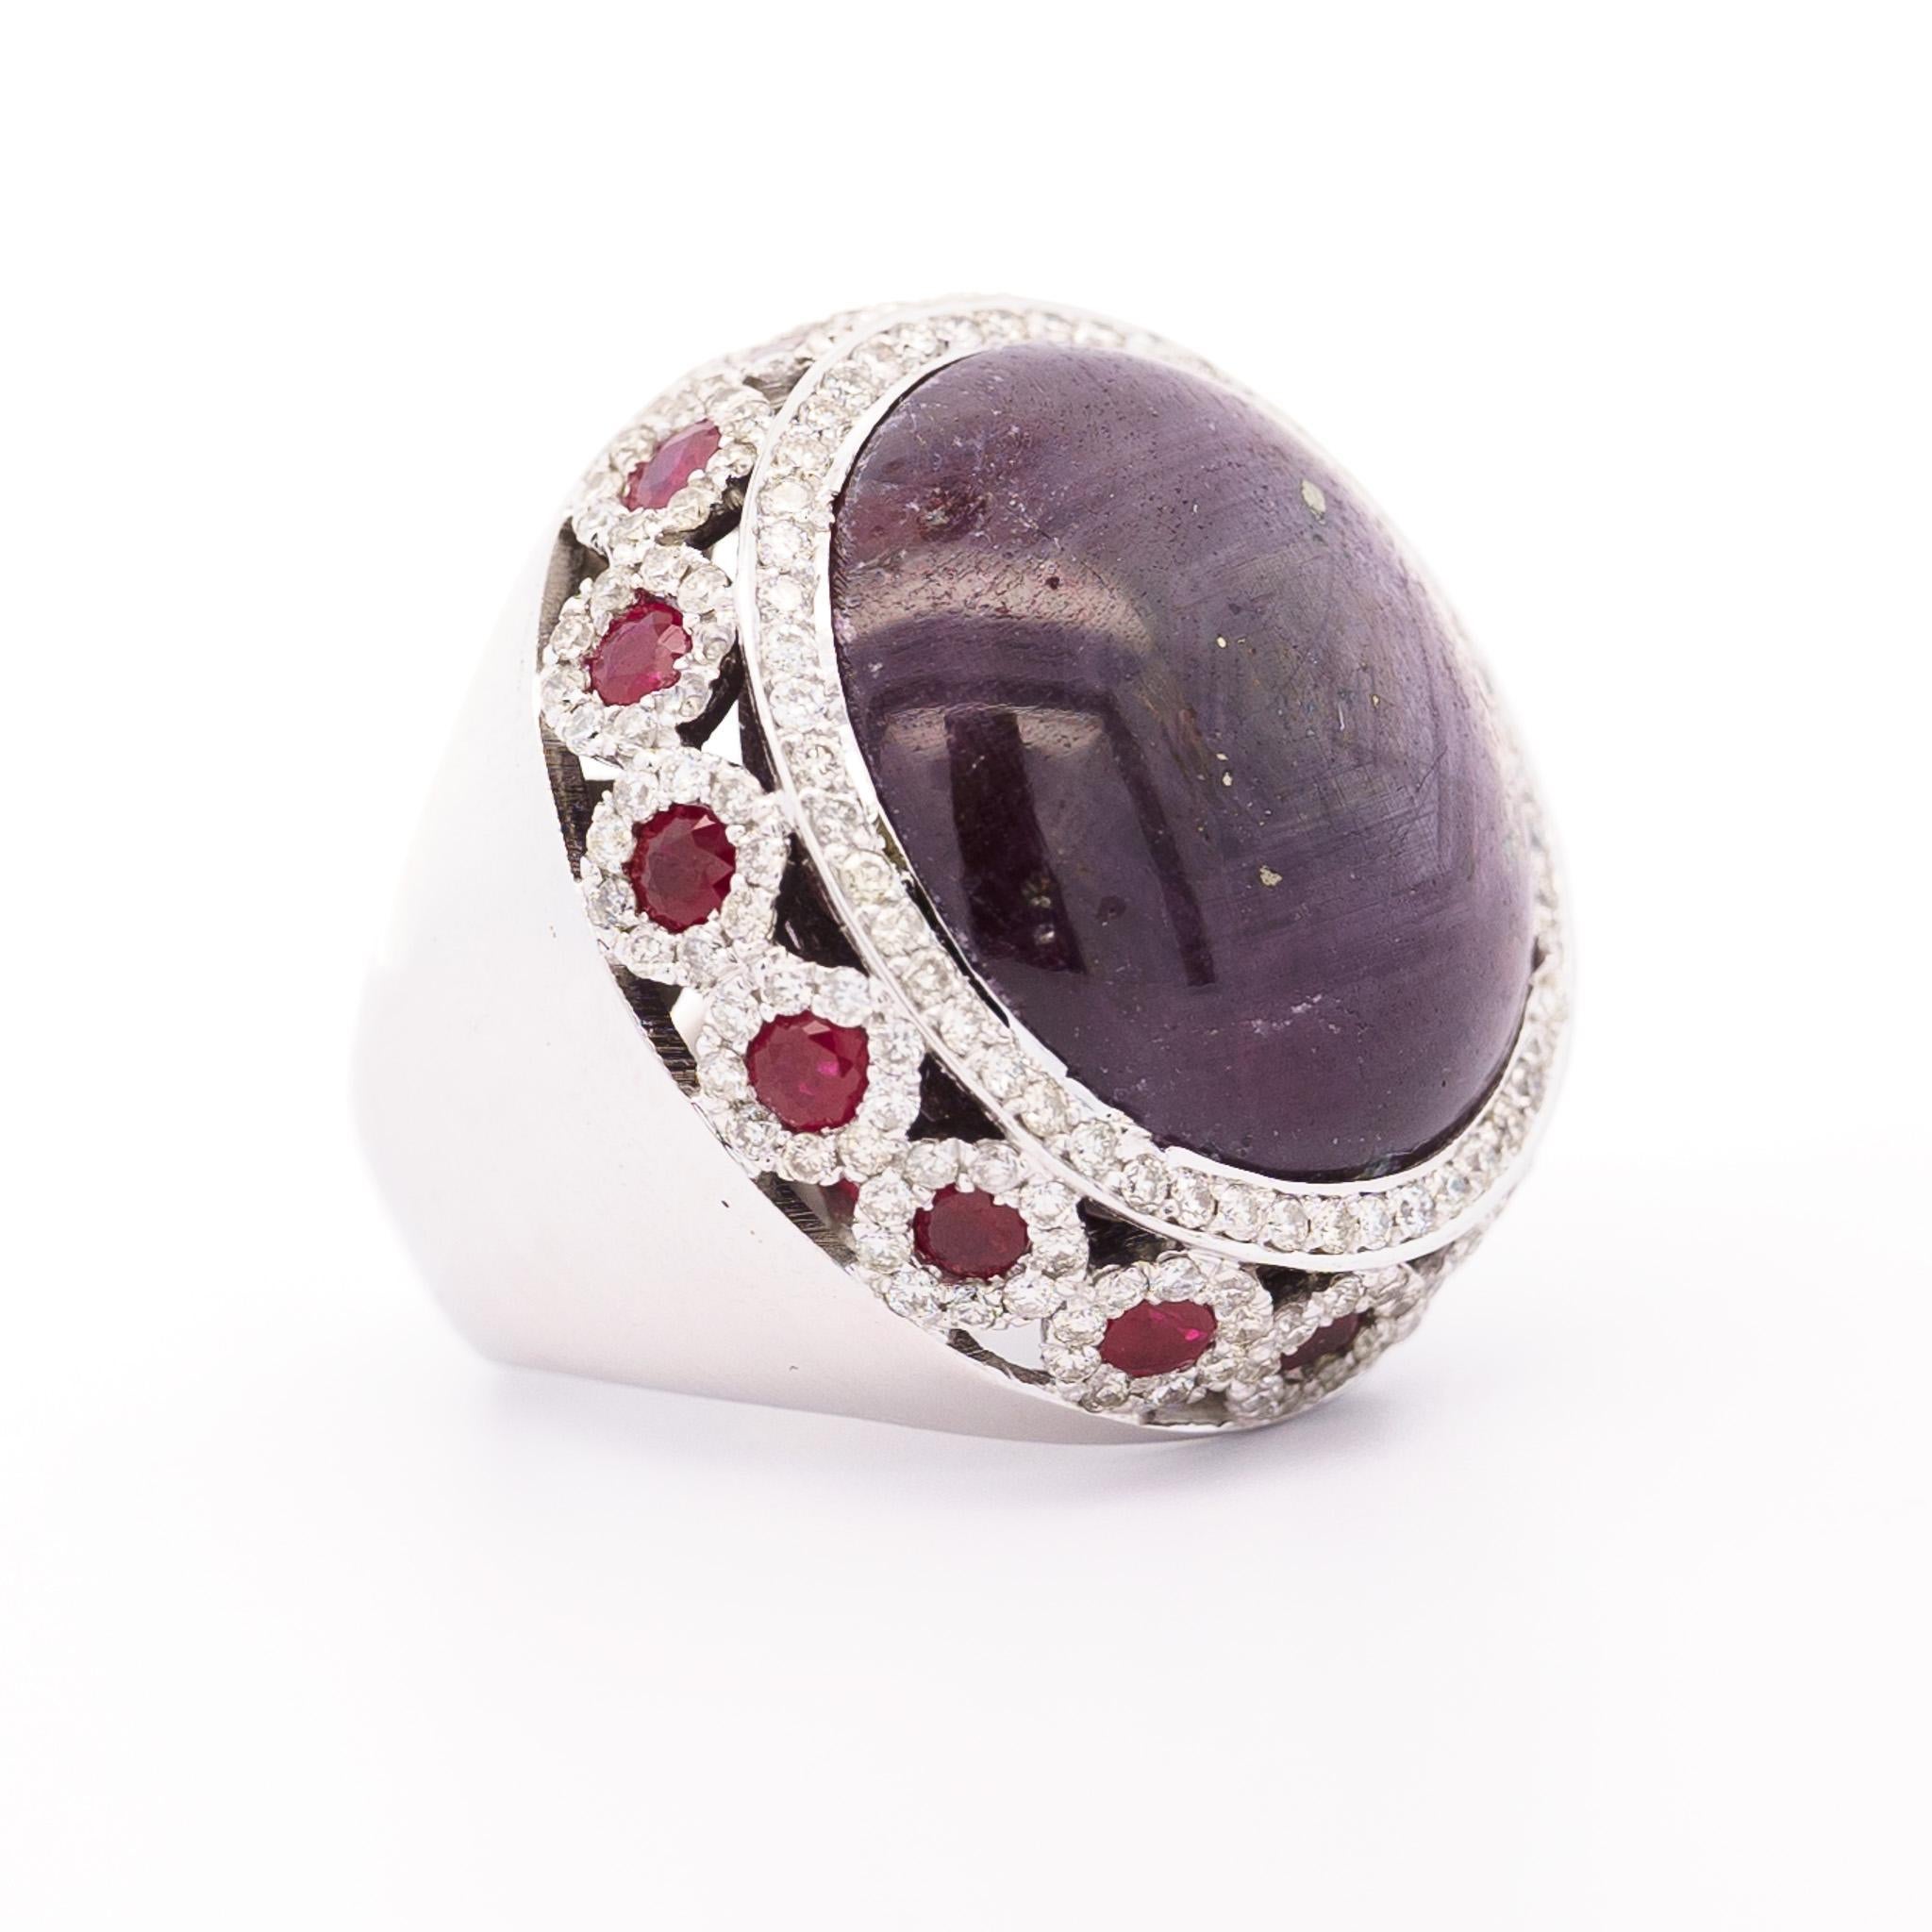 Jewelry Details:
- Item Type: Ring
- Metal Type: 18K White Gold
- Weight: 31 grams
- Size: 8

Center Stone Details:
- Gemstone Type: Star Ruby
- Carat: 50 Carats (approx.)
- Cut: Cabochon-Cut
- Size: 21.5mm 

Side Stone Details:
- Gemstone Type: